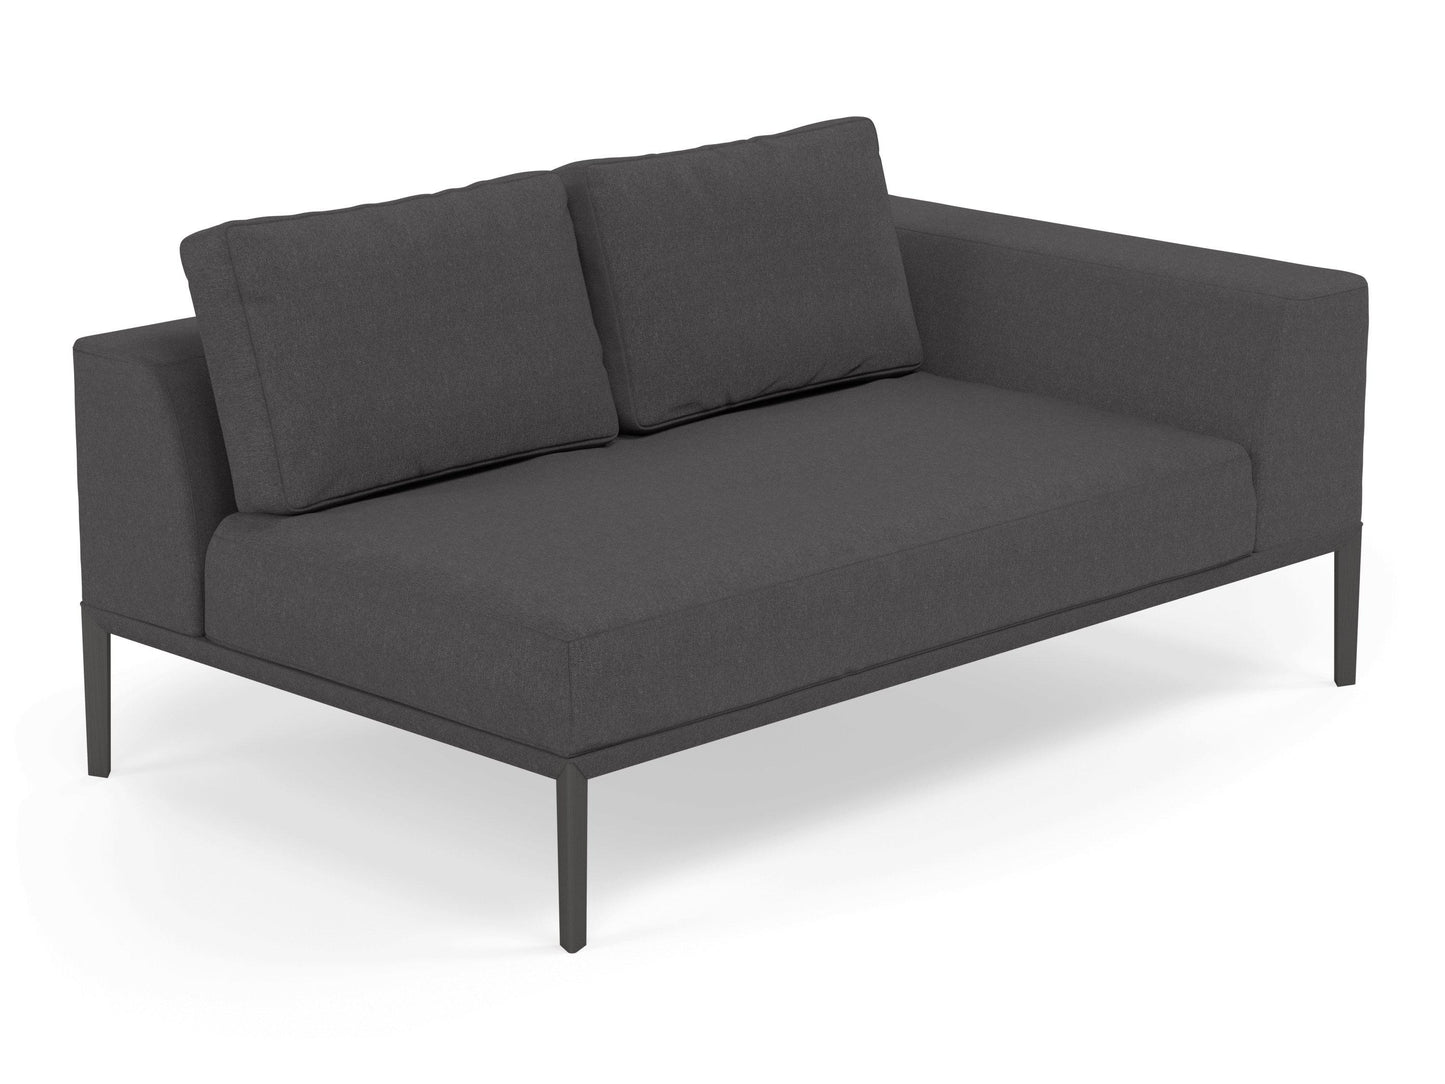 Modern 2 Seater Chaise Lounge Style Sofa with Left Armrest in Slate Grey Fabric-Distinct Designs (London) Ltd